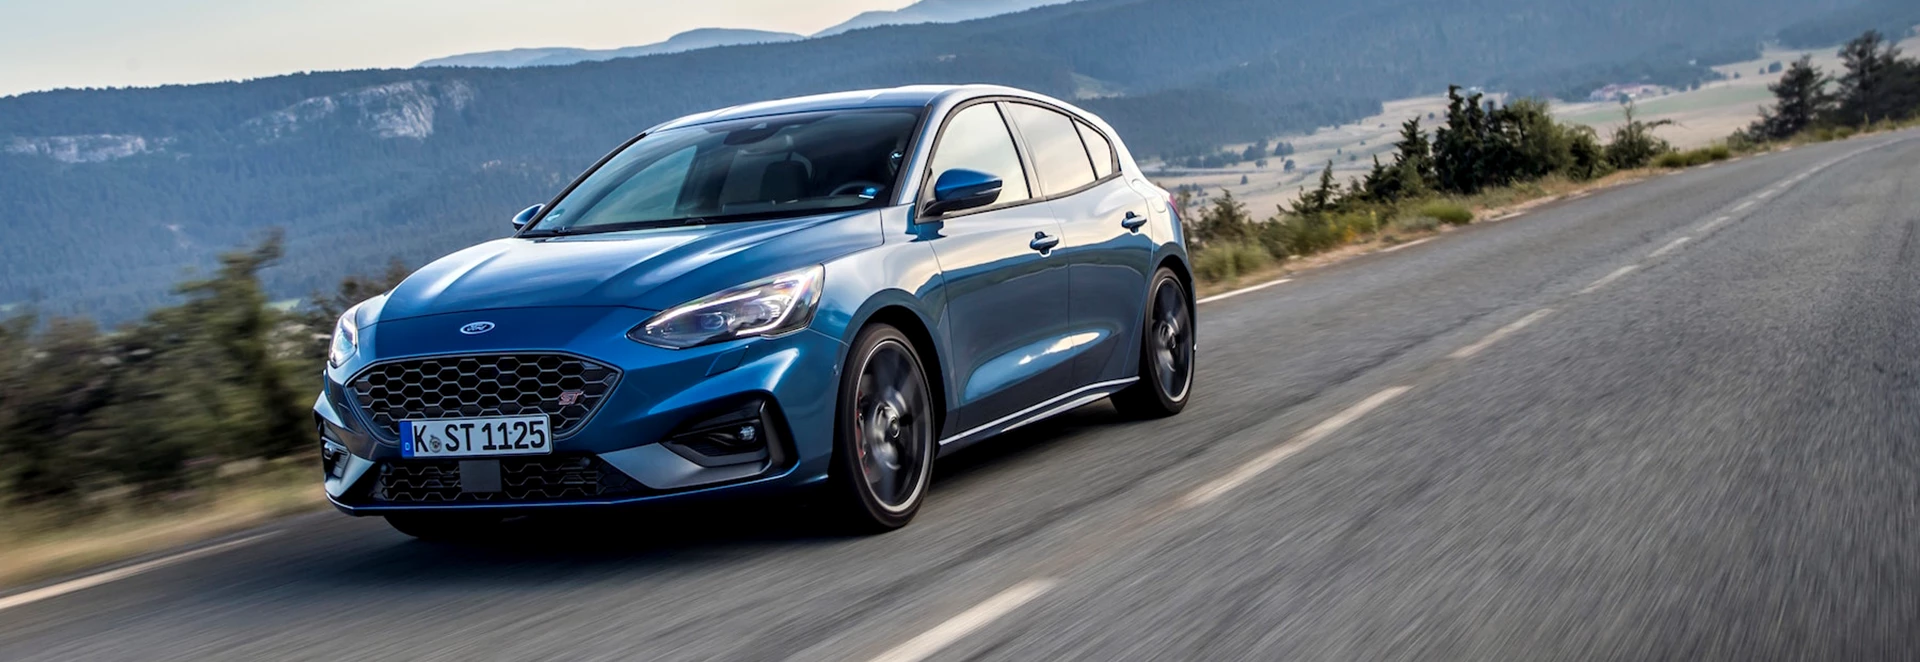 Ford Focus ST 2019 Review